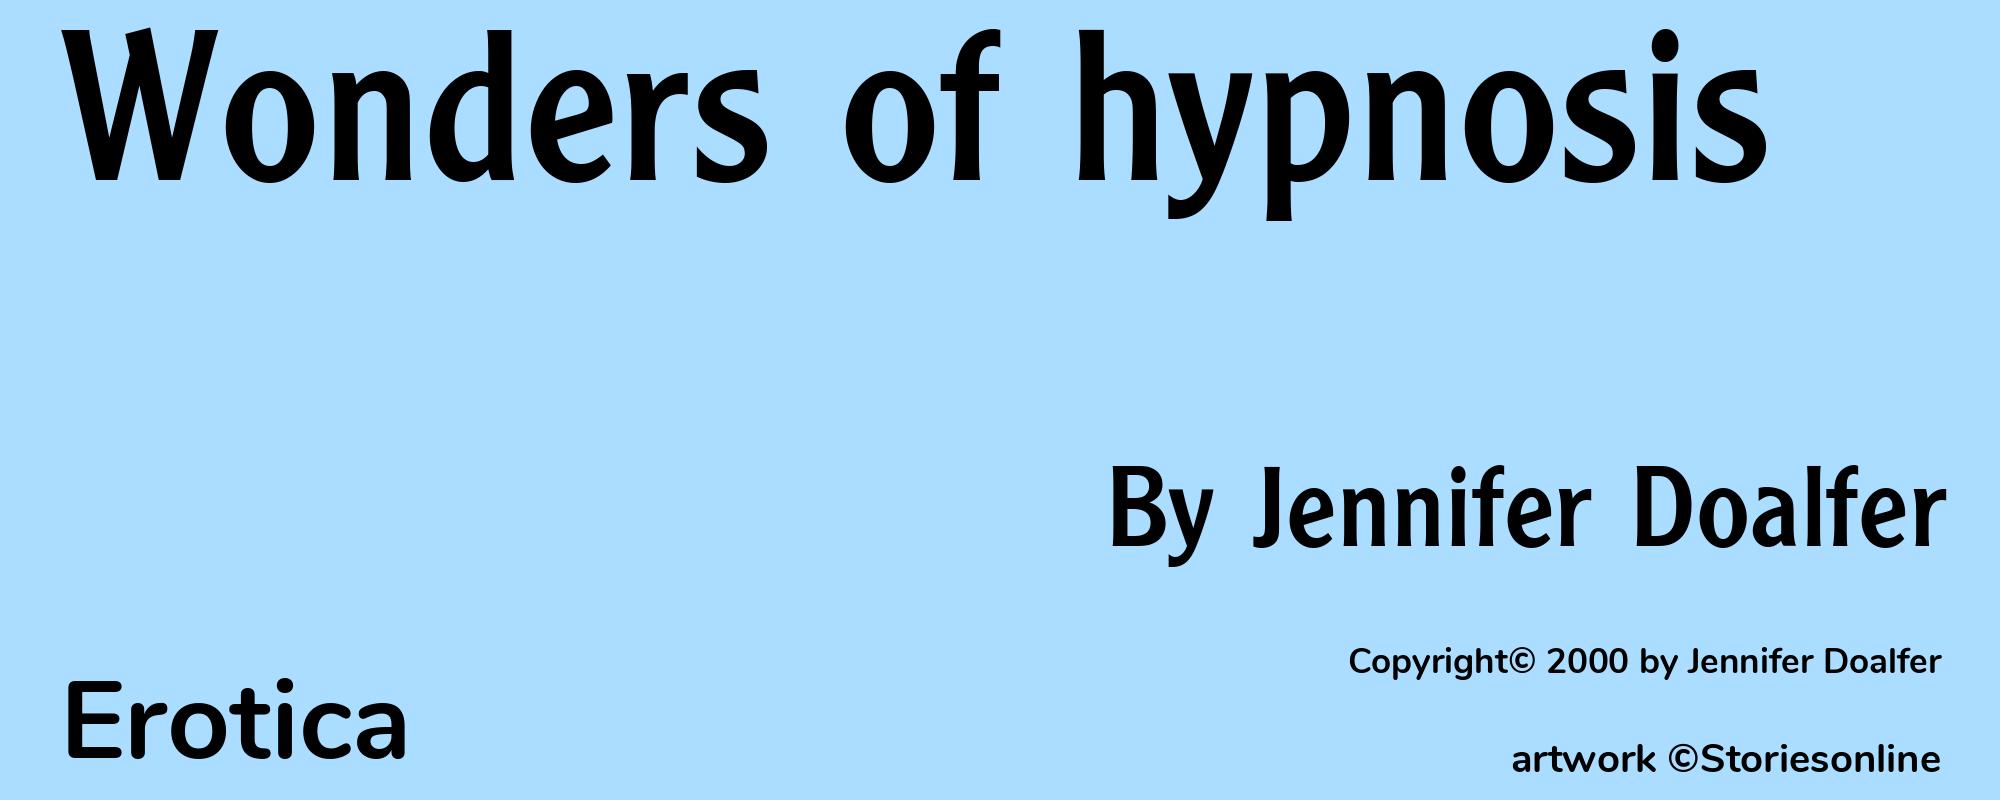 Wonders of hypnosis - Cover